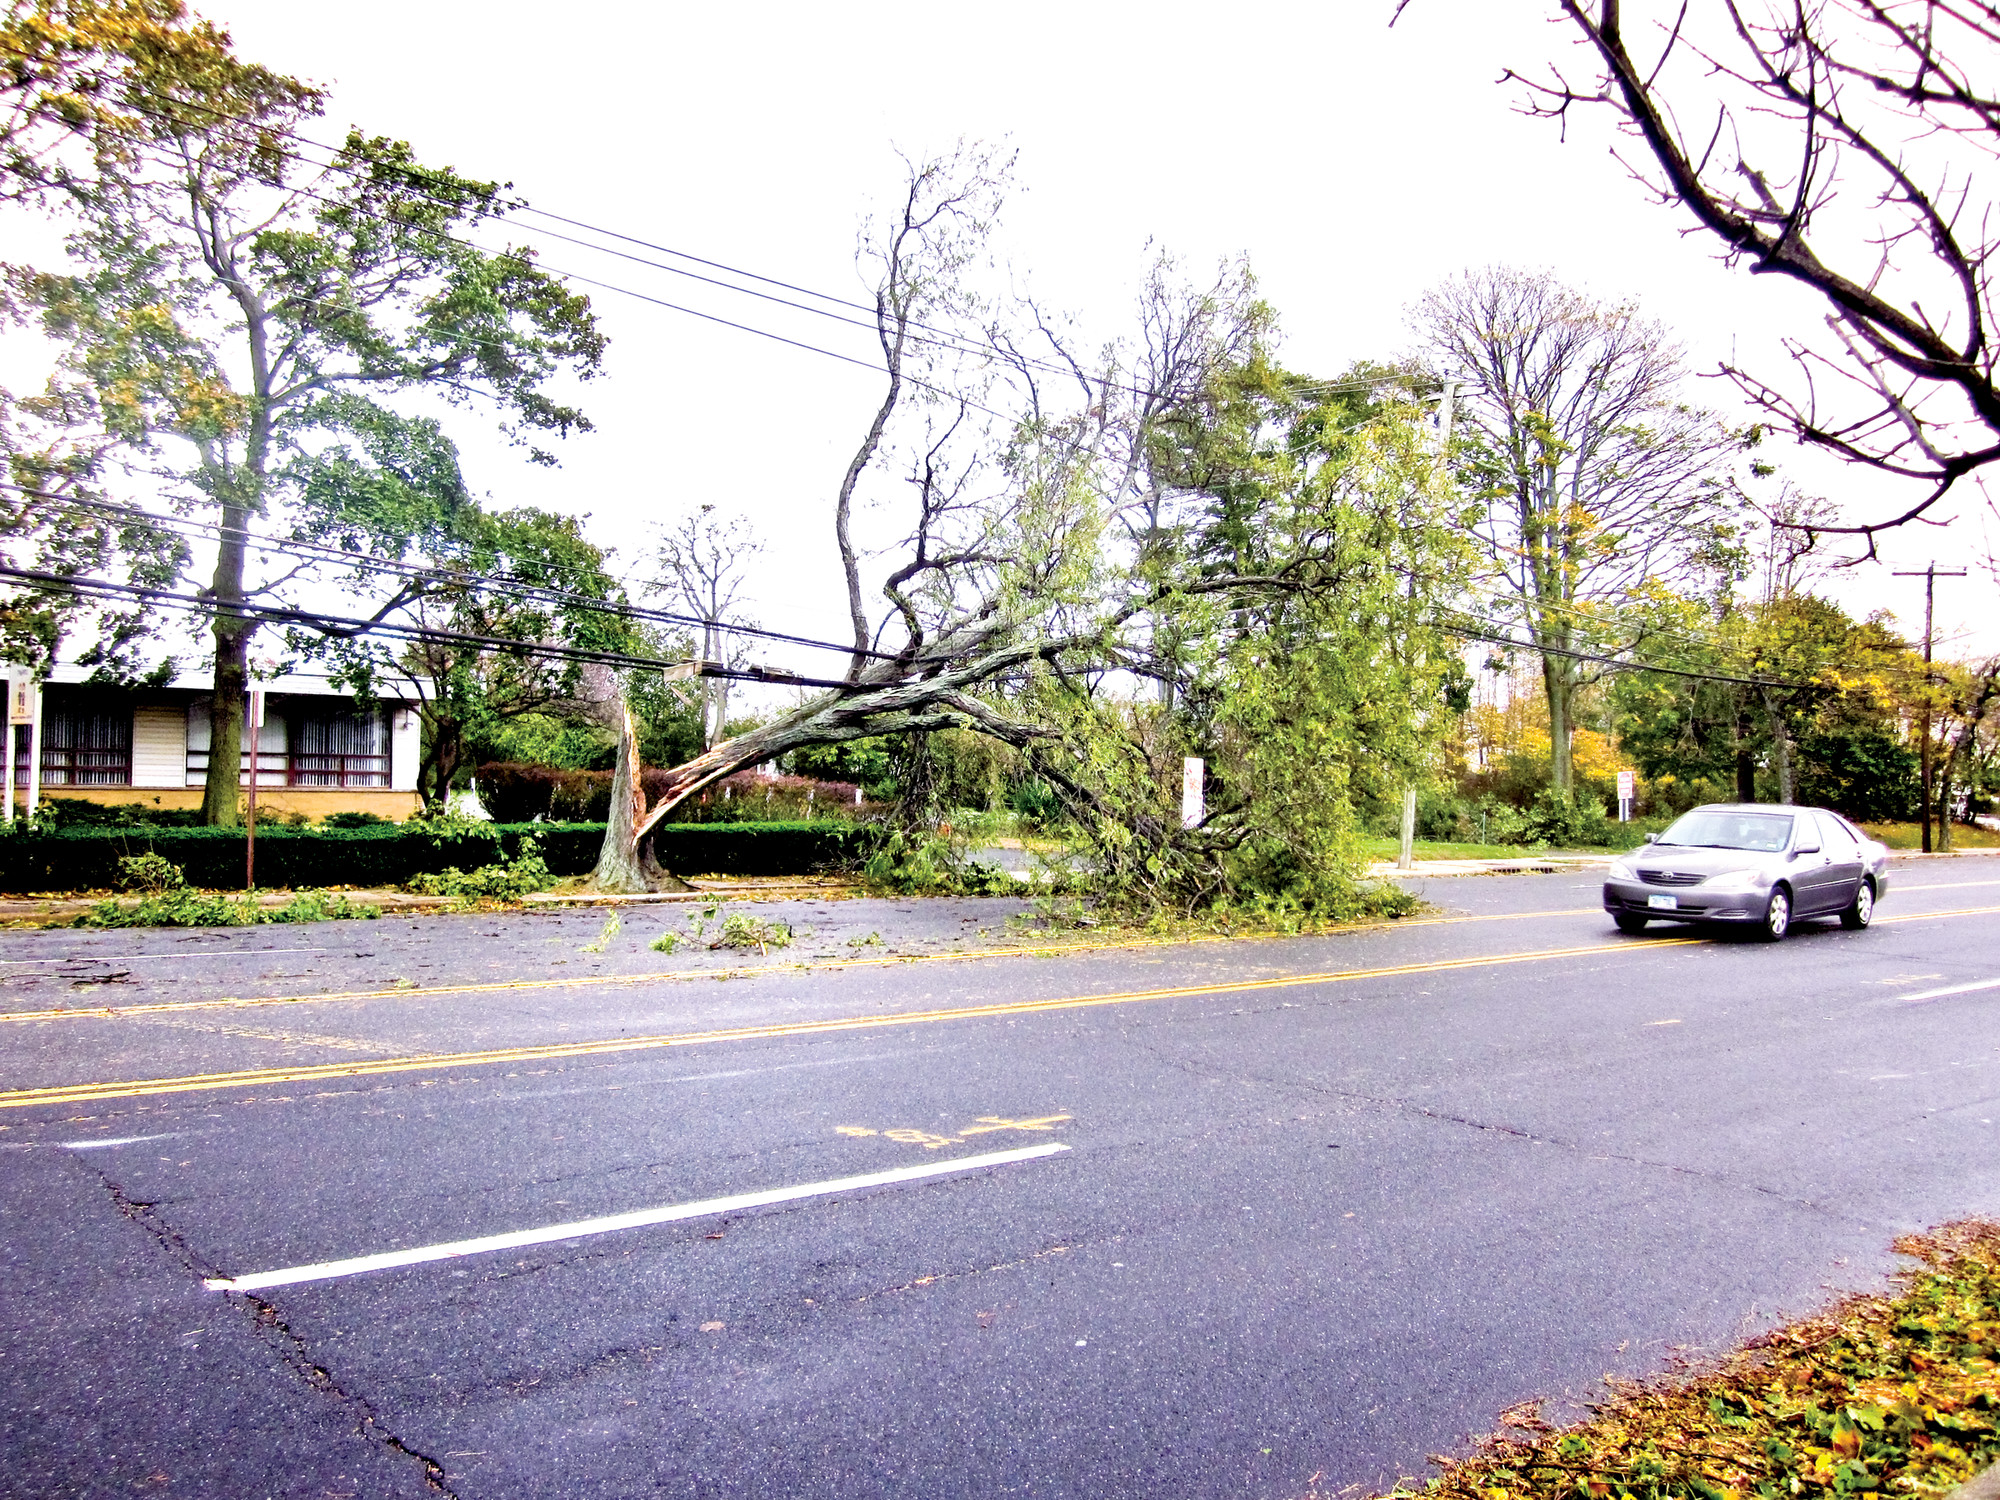 Cars had to swerve around this fallen tree on Merrick Avenue a day after the storm, outside Temple Emanu-El.